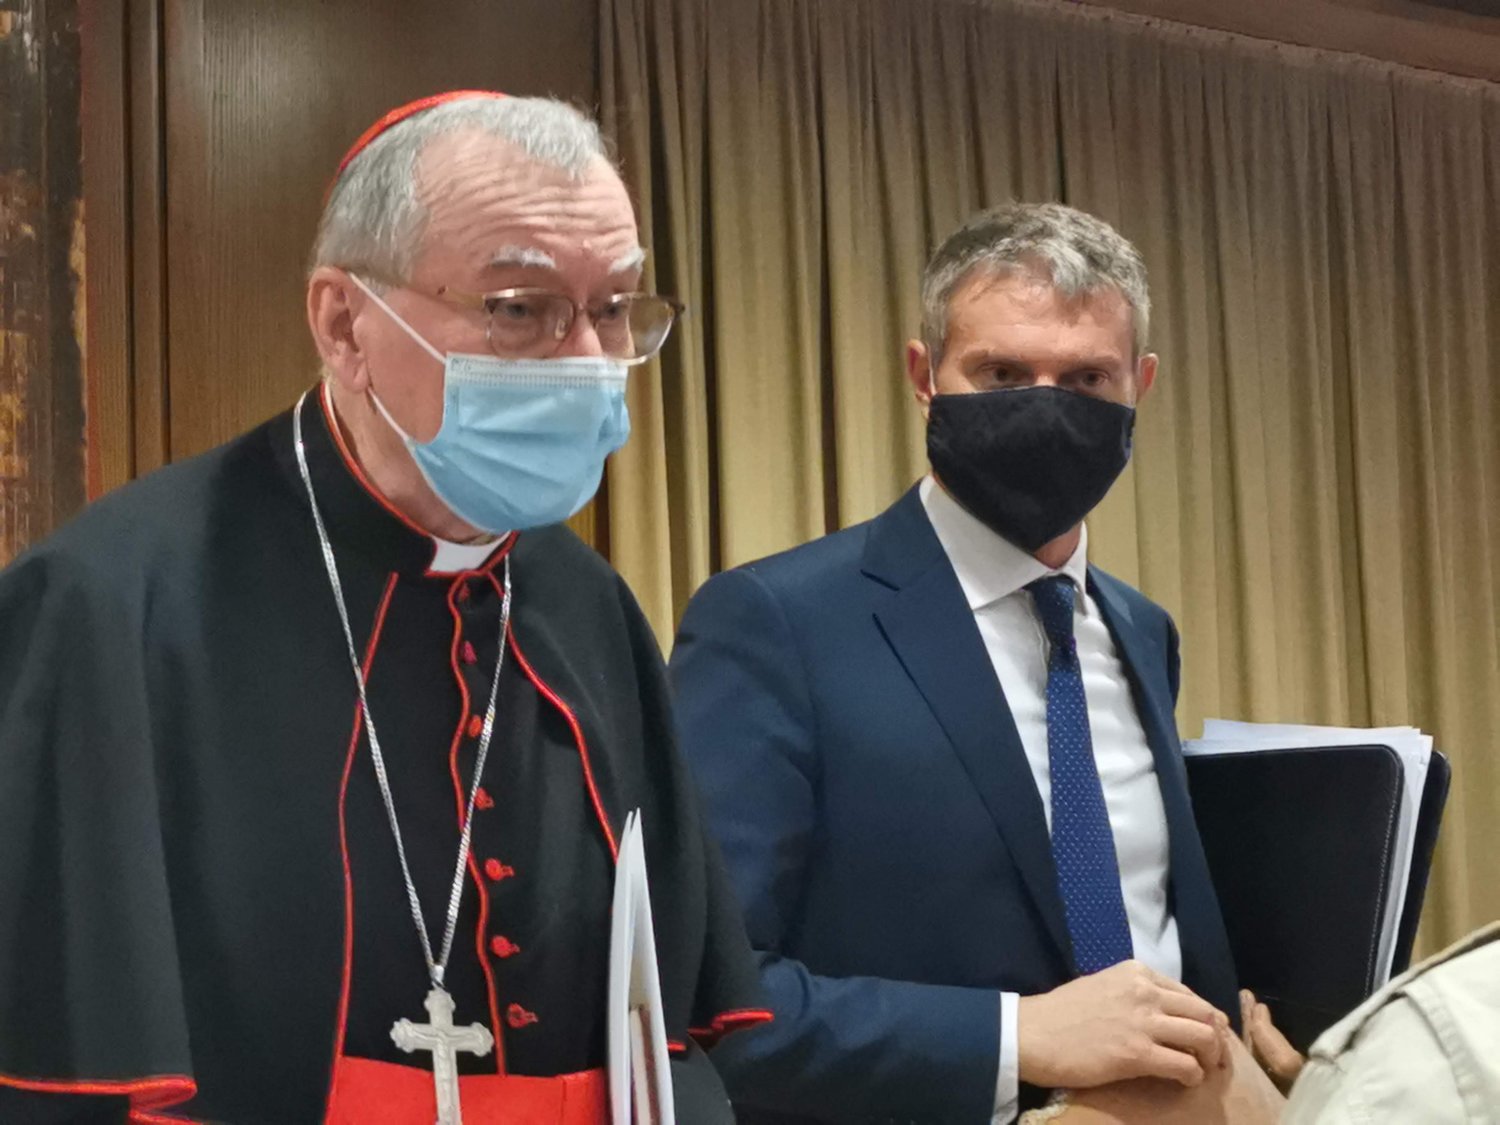 Cardinal Pietro Parolin, Vatican secretary of state, and Matteo Bruni, director of the Vatican Press Office, are pictured during a press conference for the release of Pope Francis' new encyclical, "Fratelli Tutti, on Fraternity and Social Friendship," in the synod hall at the Vatican Oct. 4, 2020.